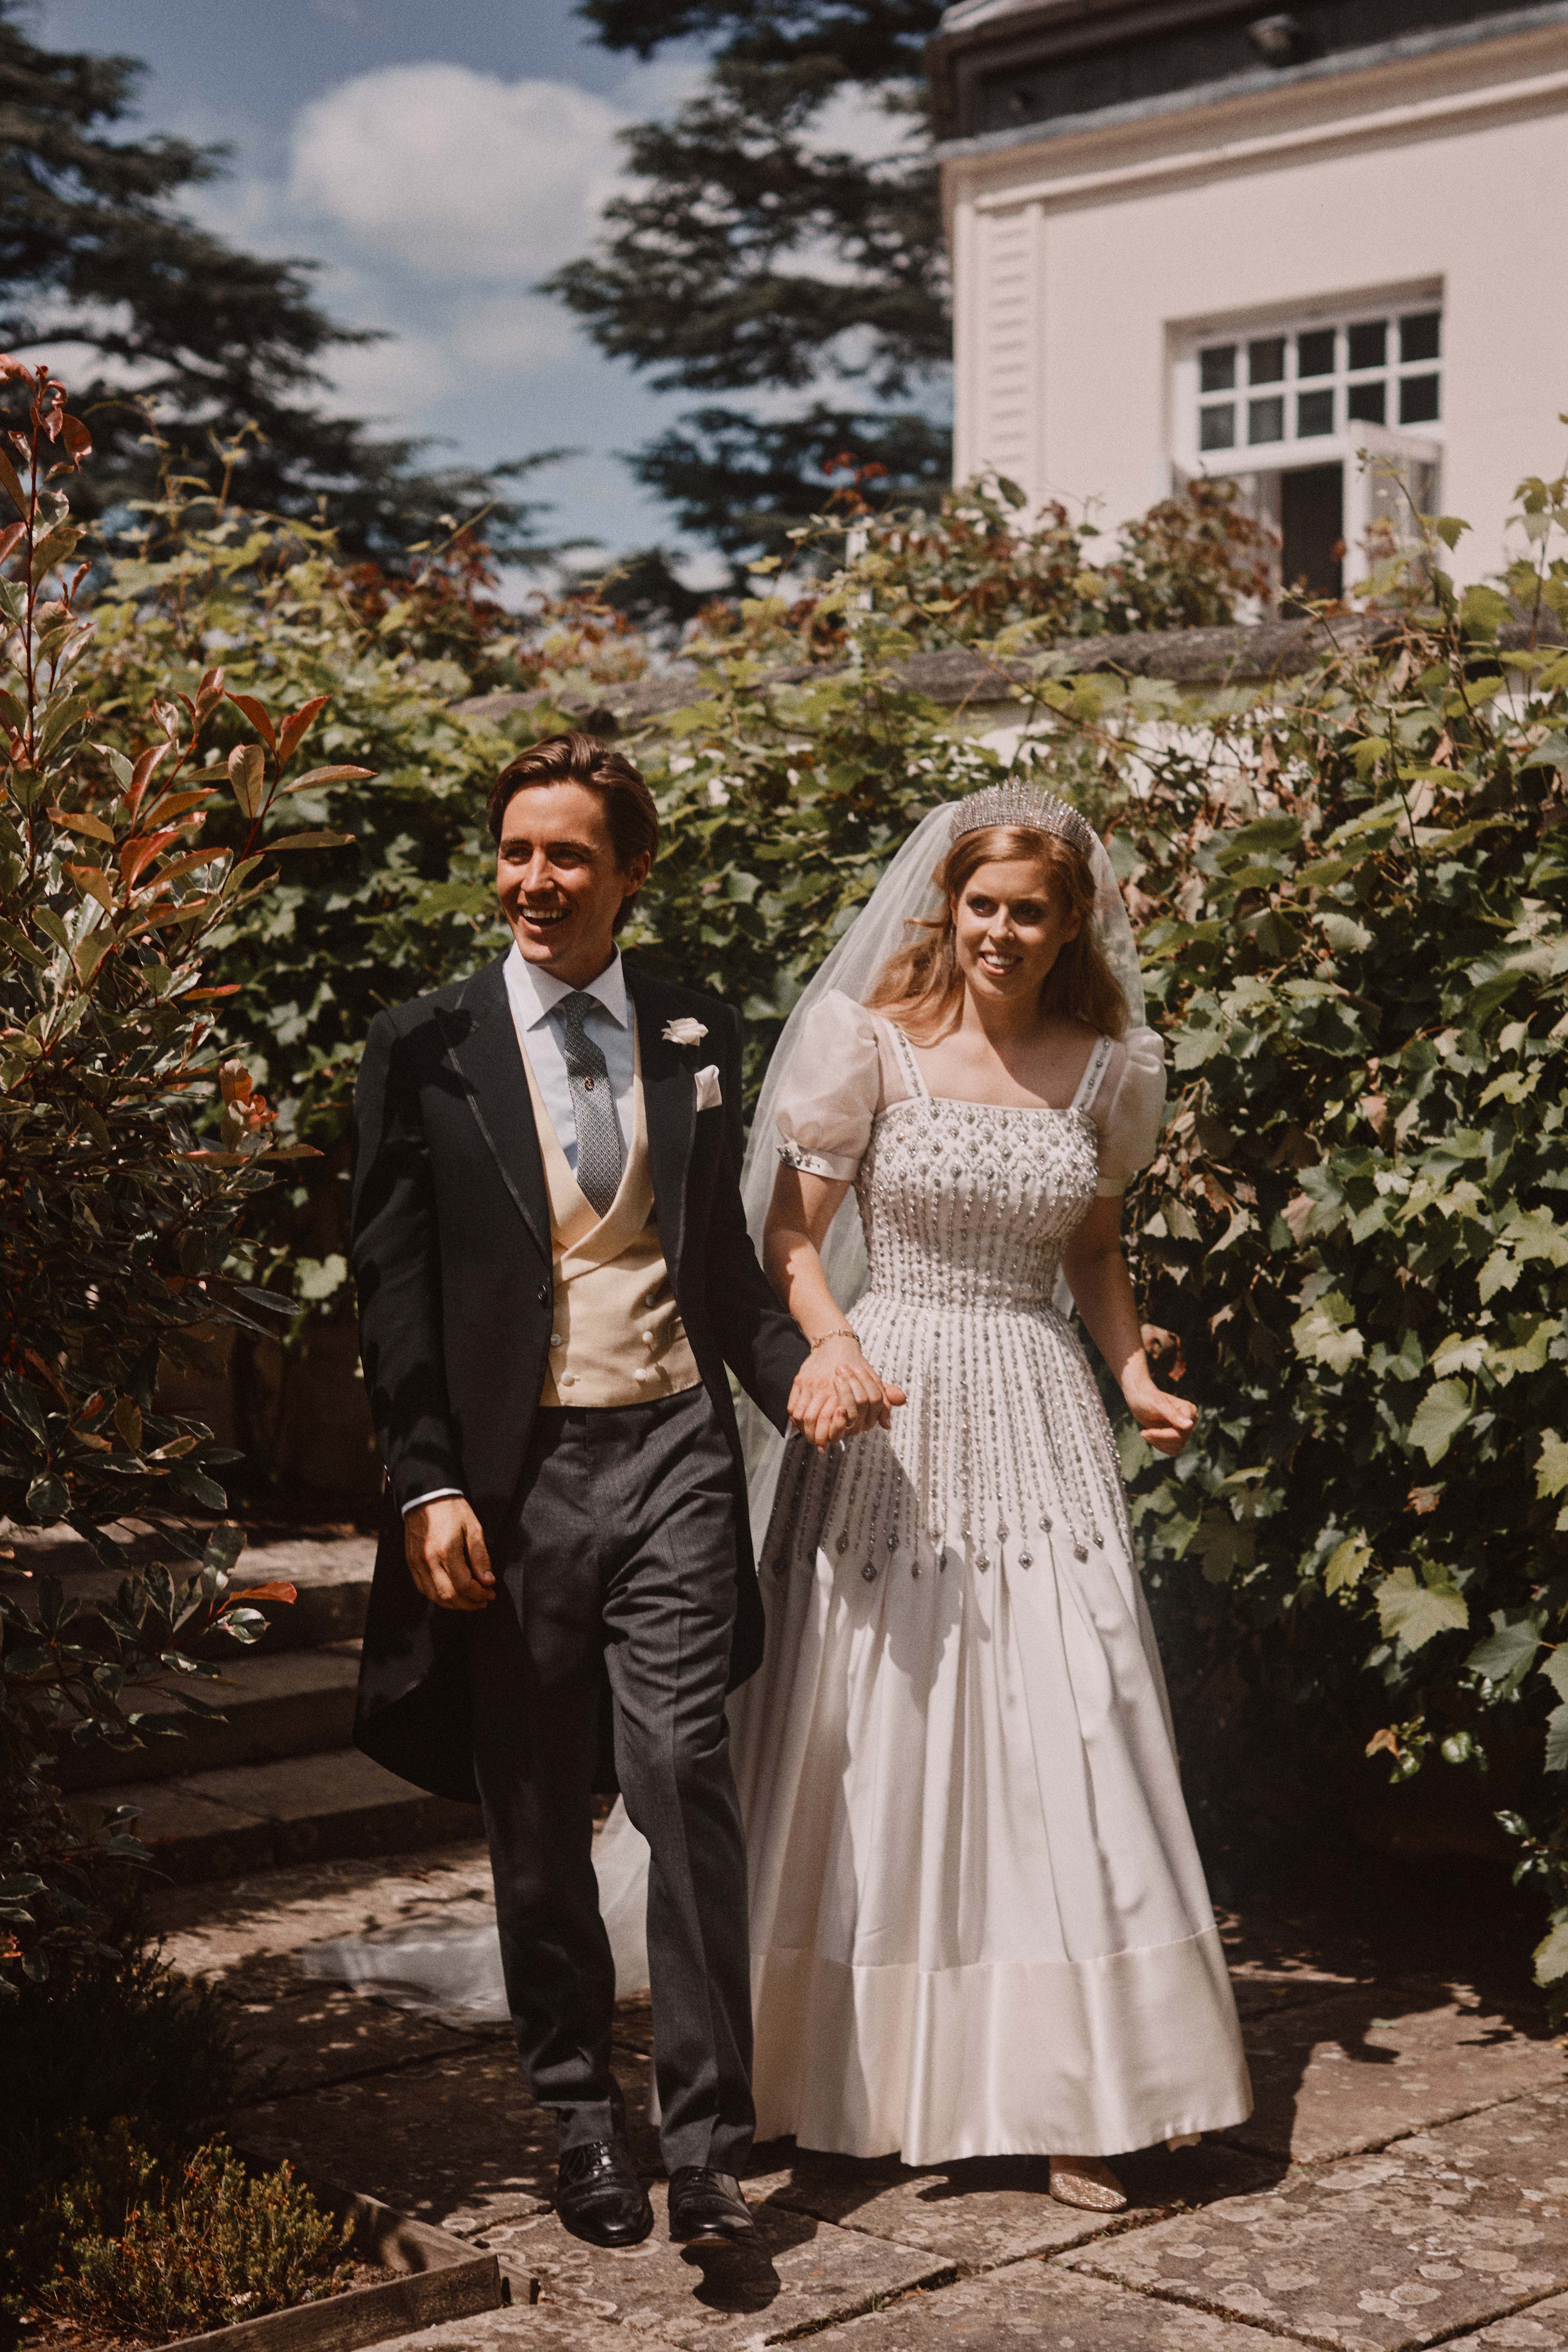 Princess Beatrice and Edoardo Mapelli Mozzi photographed after their wedding in the grounds of Royal Lodge on July 18, 2020 in Windsor, United Kingdom. / Source: Getty Images